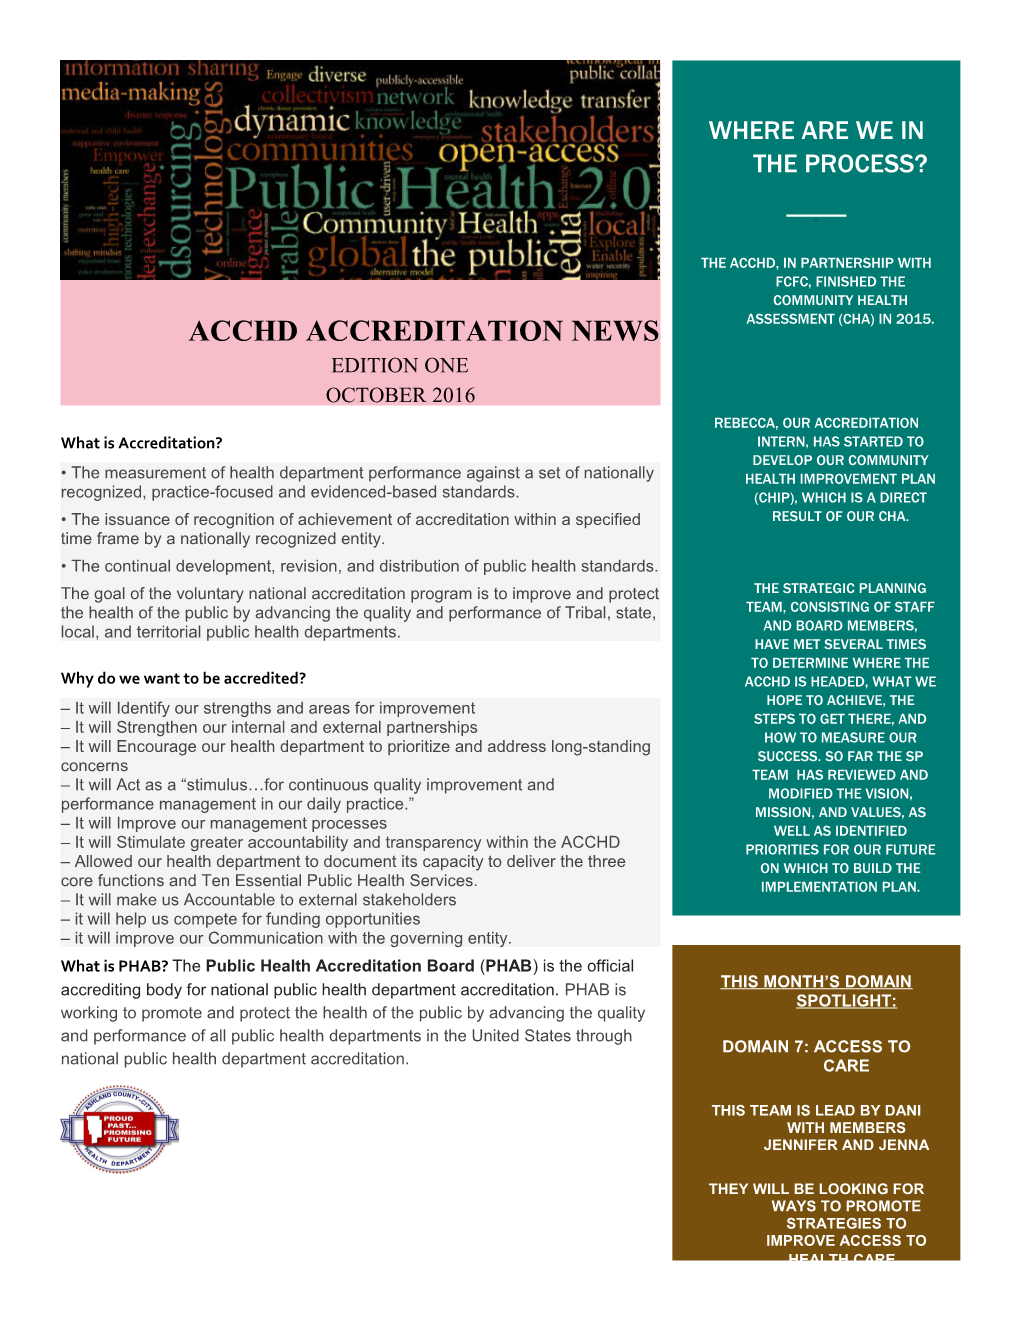 What Is Accreditation?